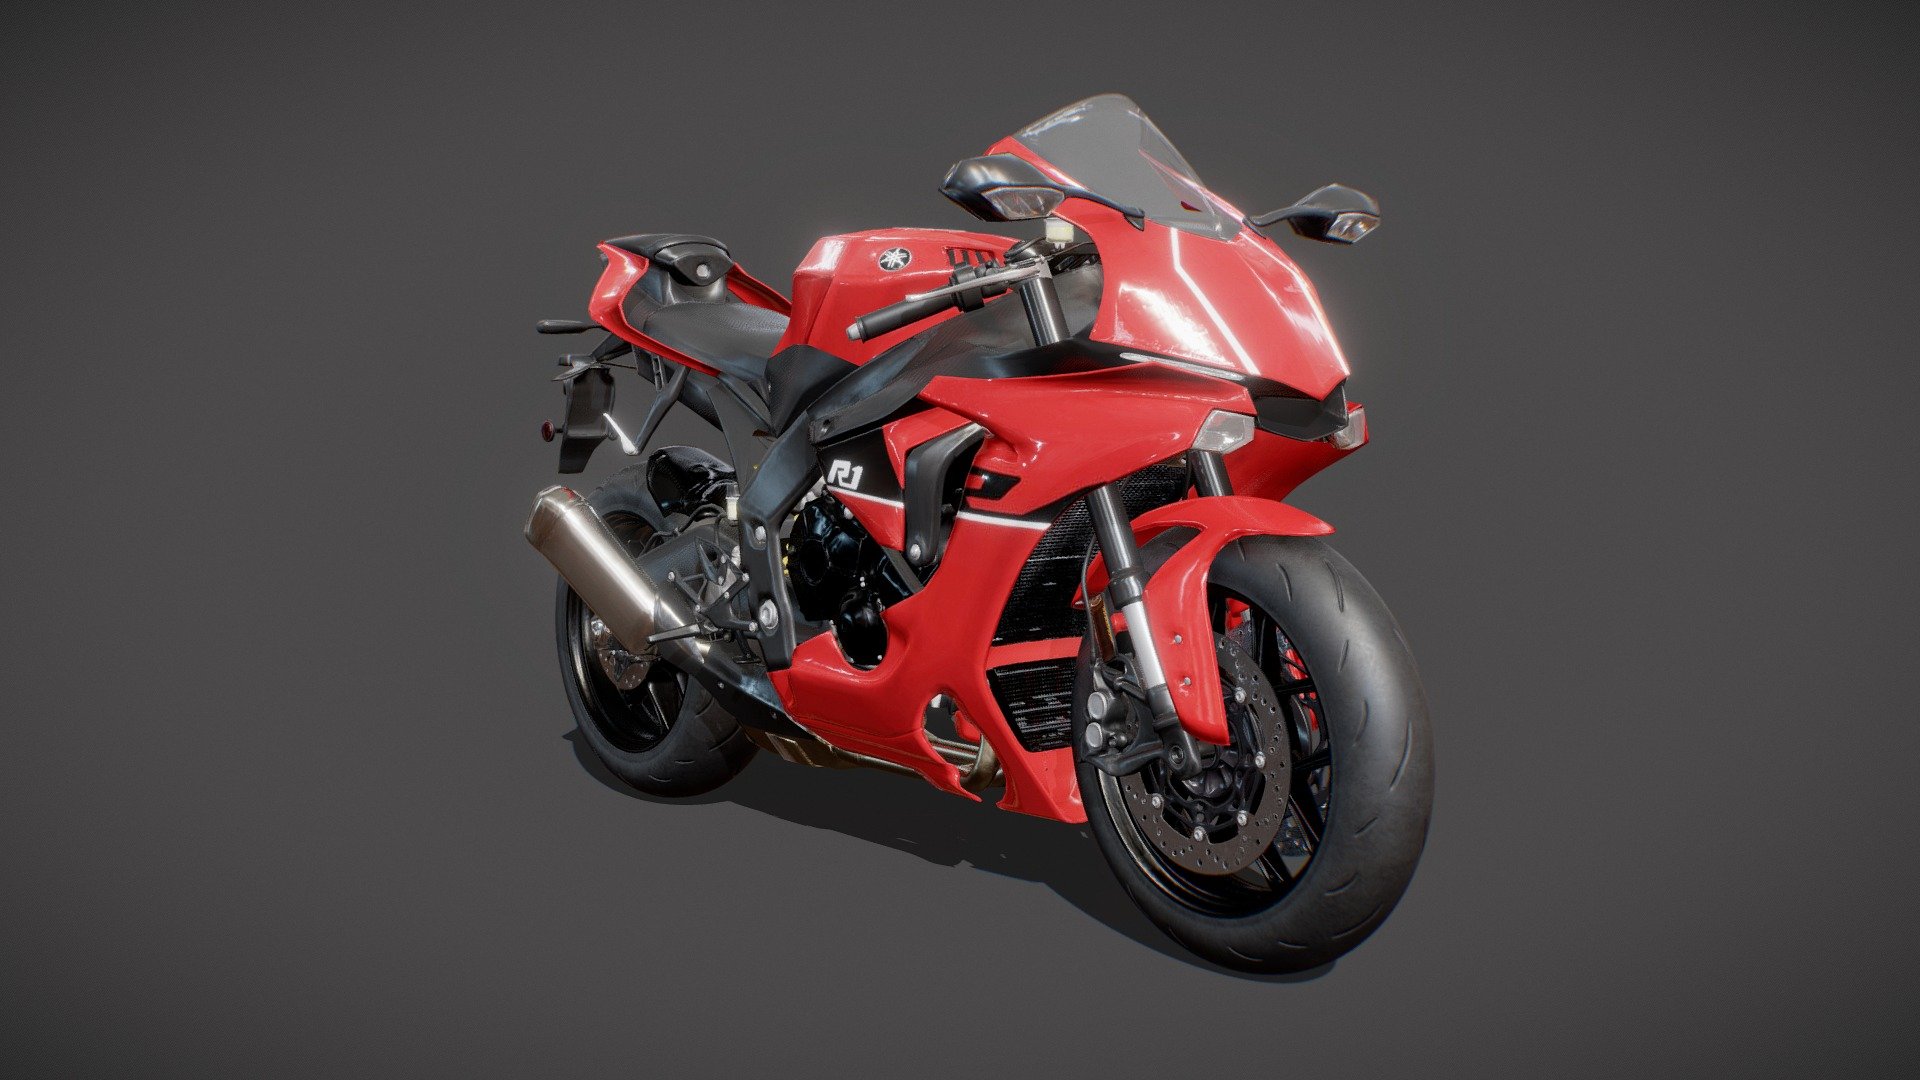 Toggle through Animation.
The Yamaha R1 Super sport Motorcycle 2015-2021 variant 3D model is a stunning representation of one of Yamaha's most iconic and high-performance motorcycles.

The 3D model is highly detailed and features a realistic rendering baked on a low poly model, engine, wheels, and other components made up of hundreds of thousands of polygons that were all manually placed.

Users can easily manipulate the 3D model using the rig attached in .blend and .fbx file format along with two complex .obj files containing the original detailed model.


Made out of 250+ unique pieces in high detail to then be baked on a low poly model, which can be used in animation, games and renders cheaply.


Included files:
1-  Blend and Fbx files containing the rigged model and three animation variants
2-  The complex model as an obj file and is also fragmented into pieces 
3-  texture for ue and pbr pipeline

Hope you enjoy it 😊 - Yamaha R1 Motorcycle - Rigged & Animated - Buy Royalty Free 3D model by Sam_Kasrawi 3d model